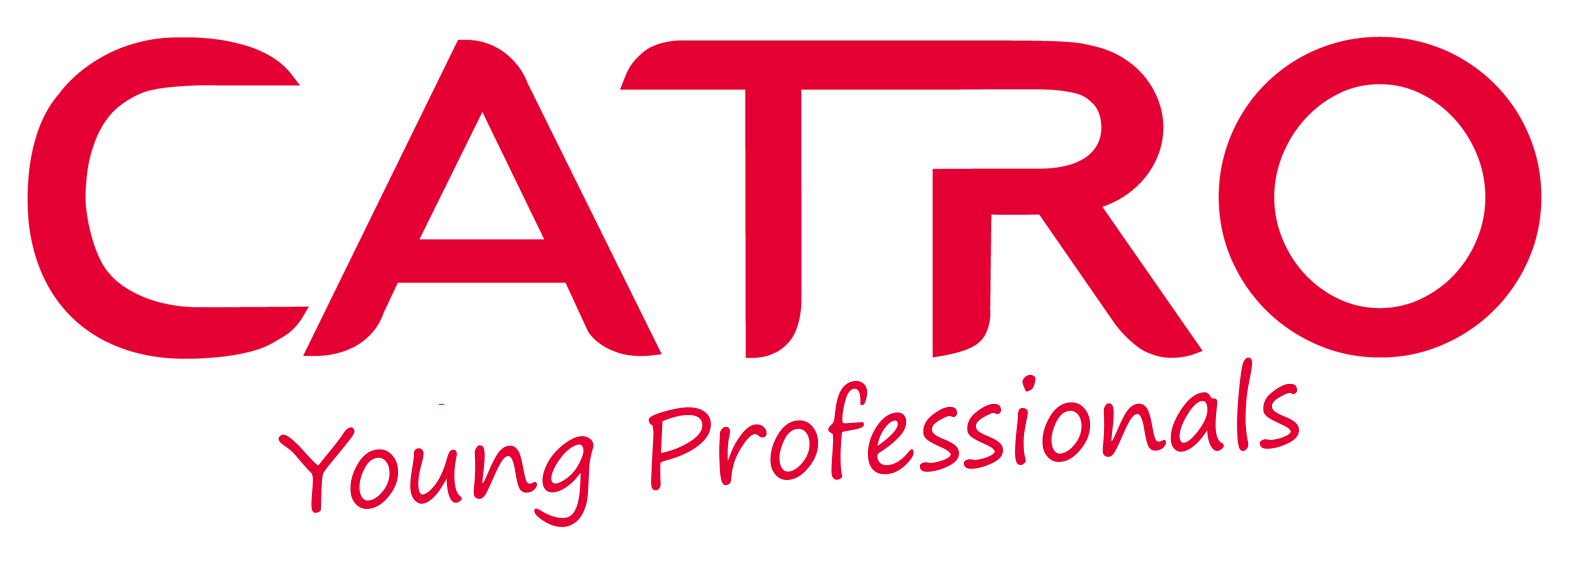 CATRO Young Professionals